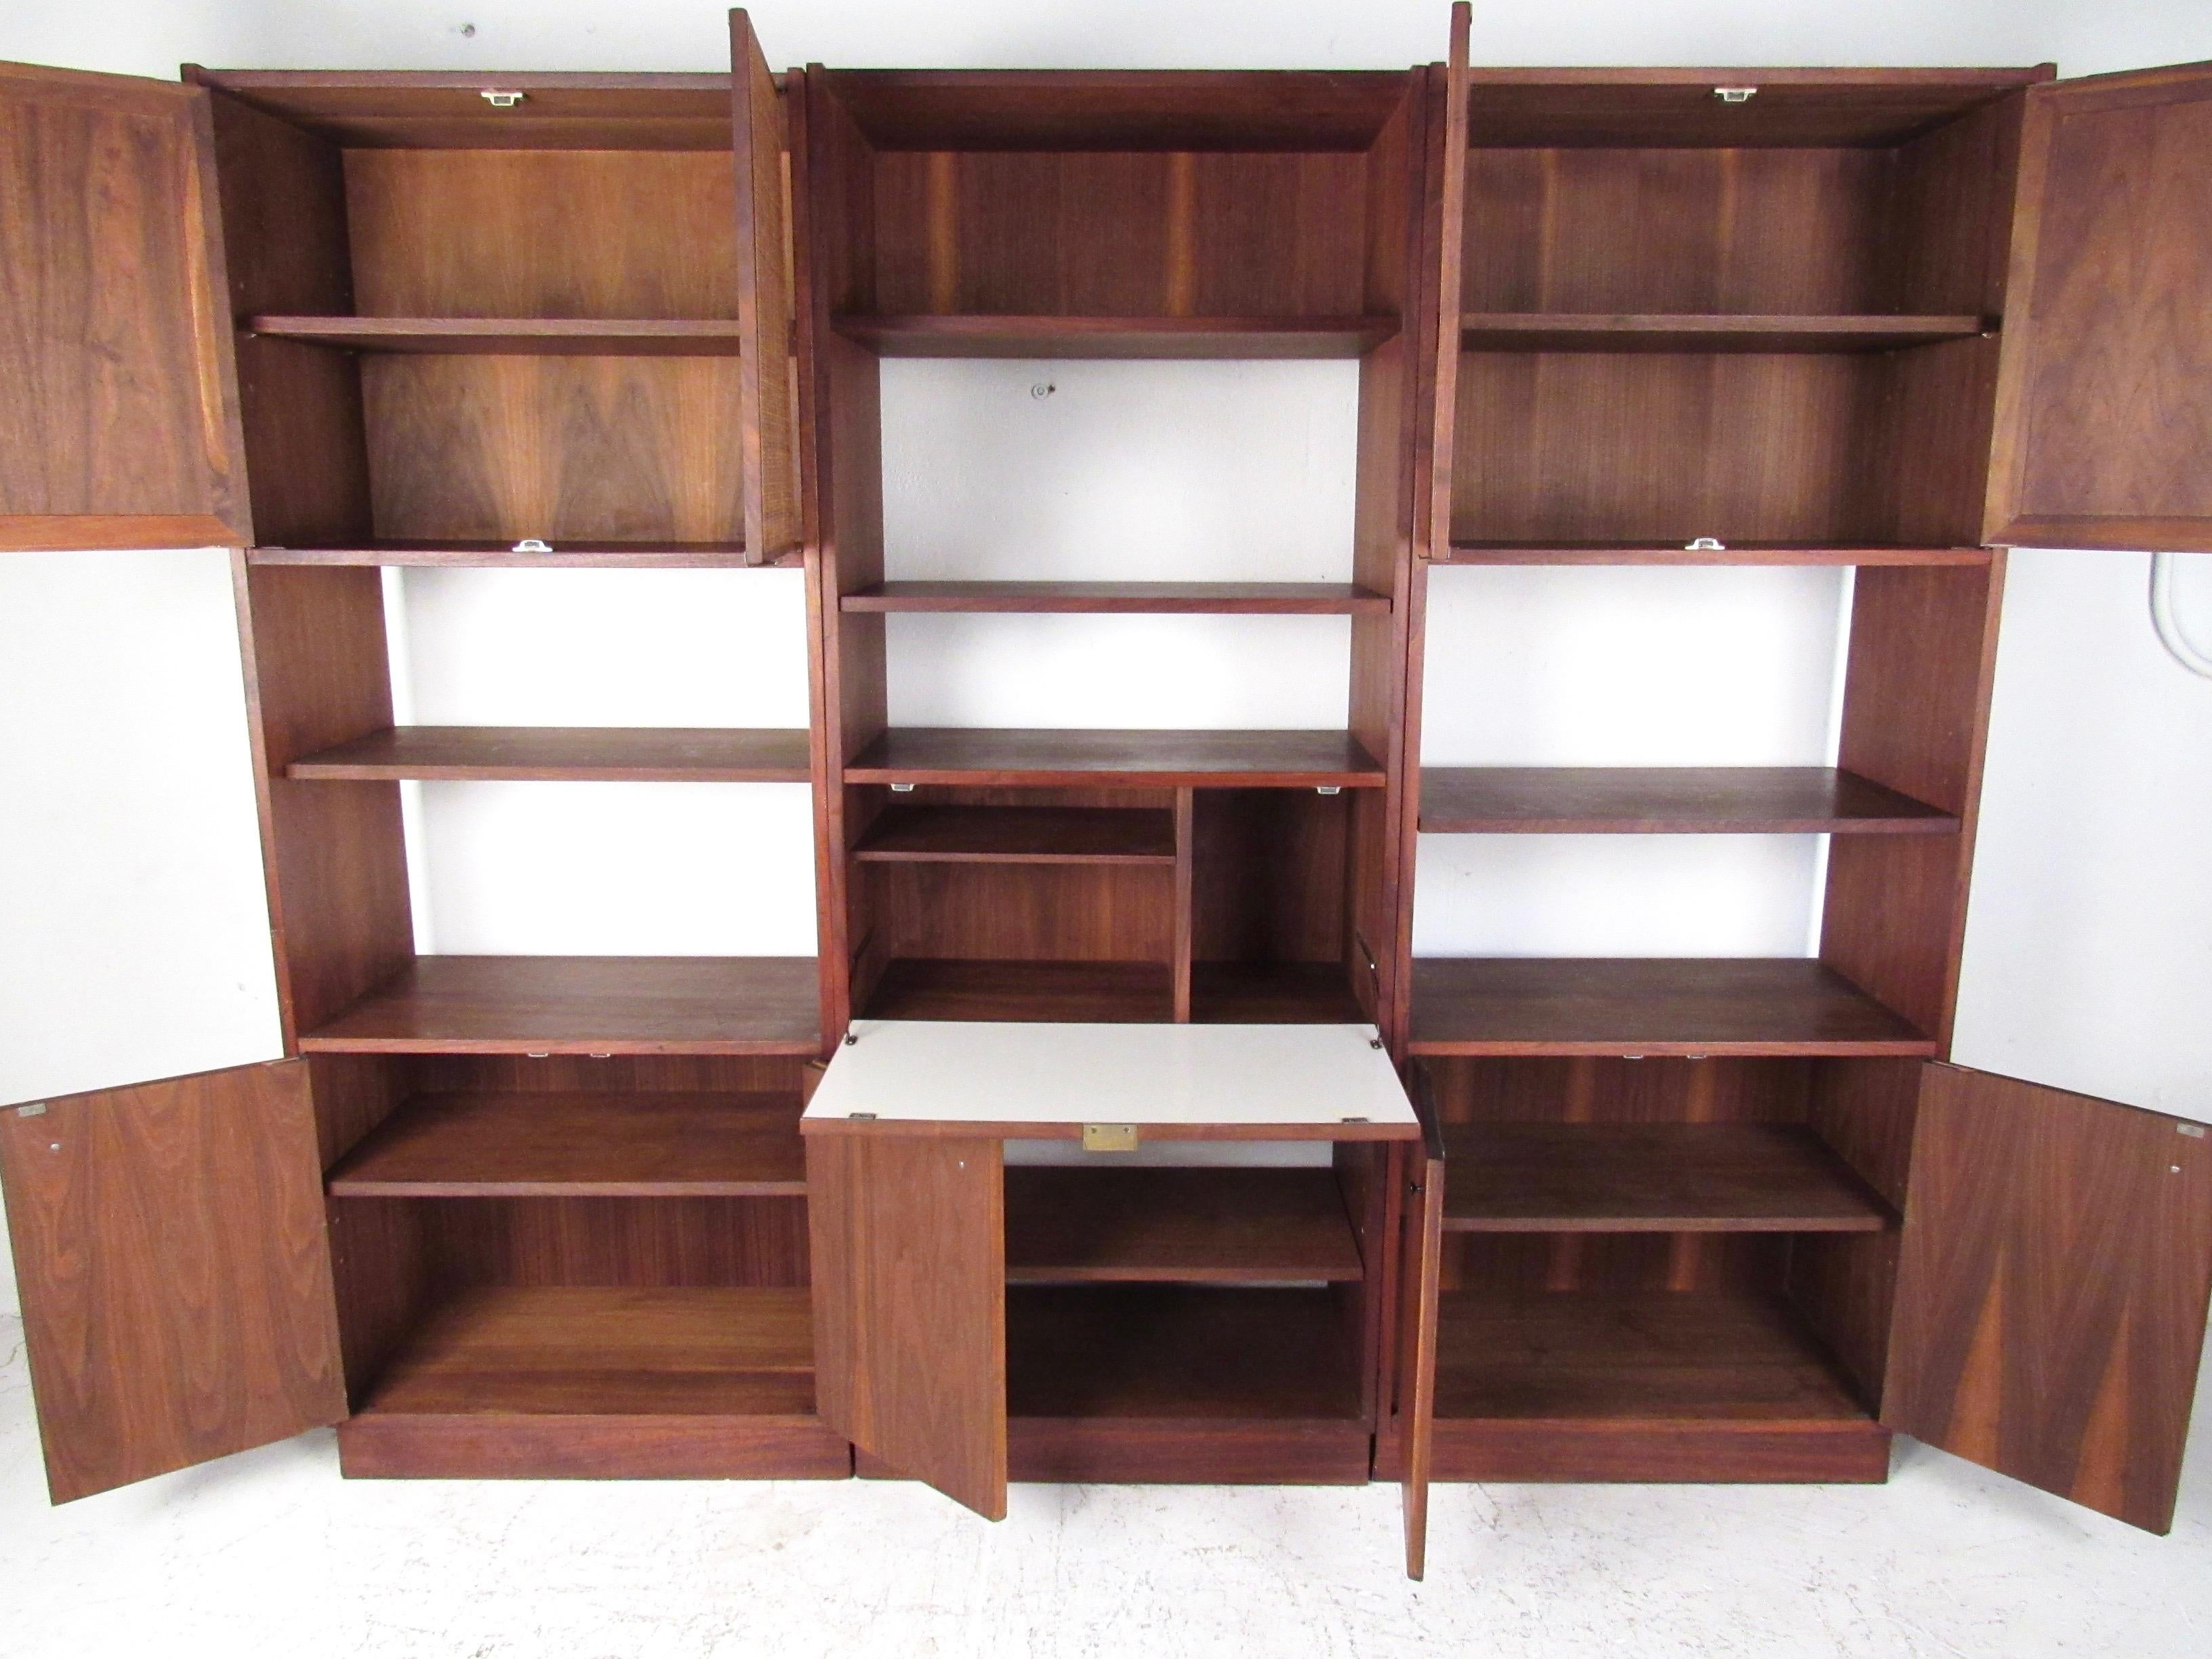 This stylish three-piece wall unit features Mid-Century Modern design and quality vintage construction. Cane front door panels add to the natural wood finish of the set and includes ample storage with open bookshelves and large cabinets, perfect for